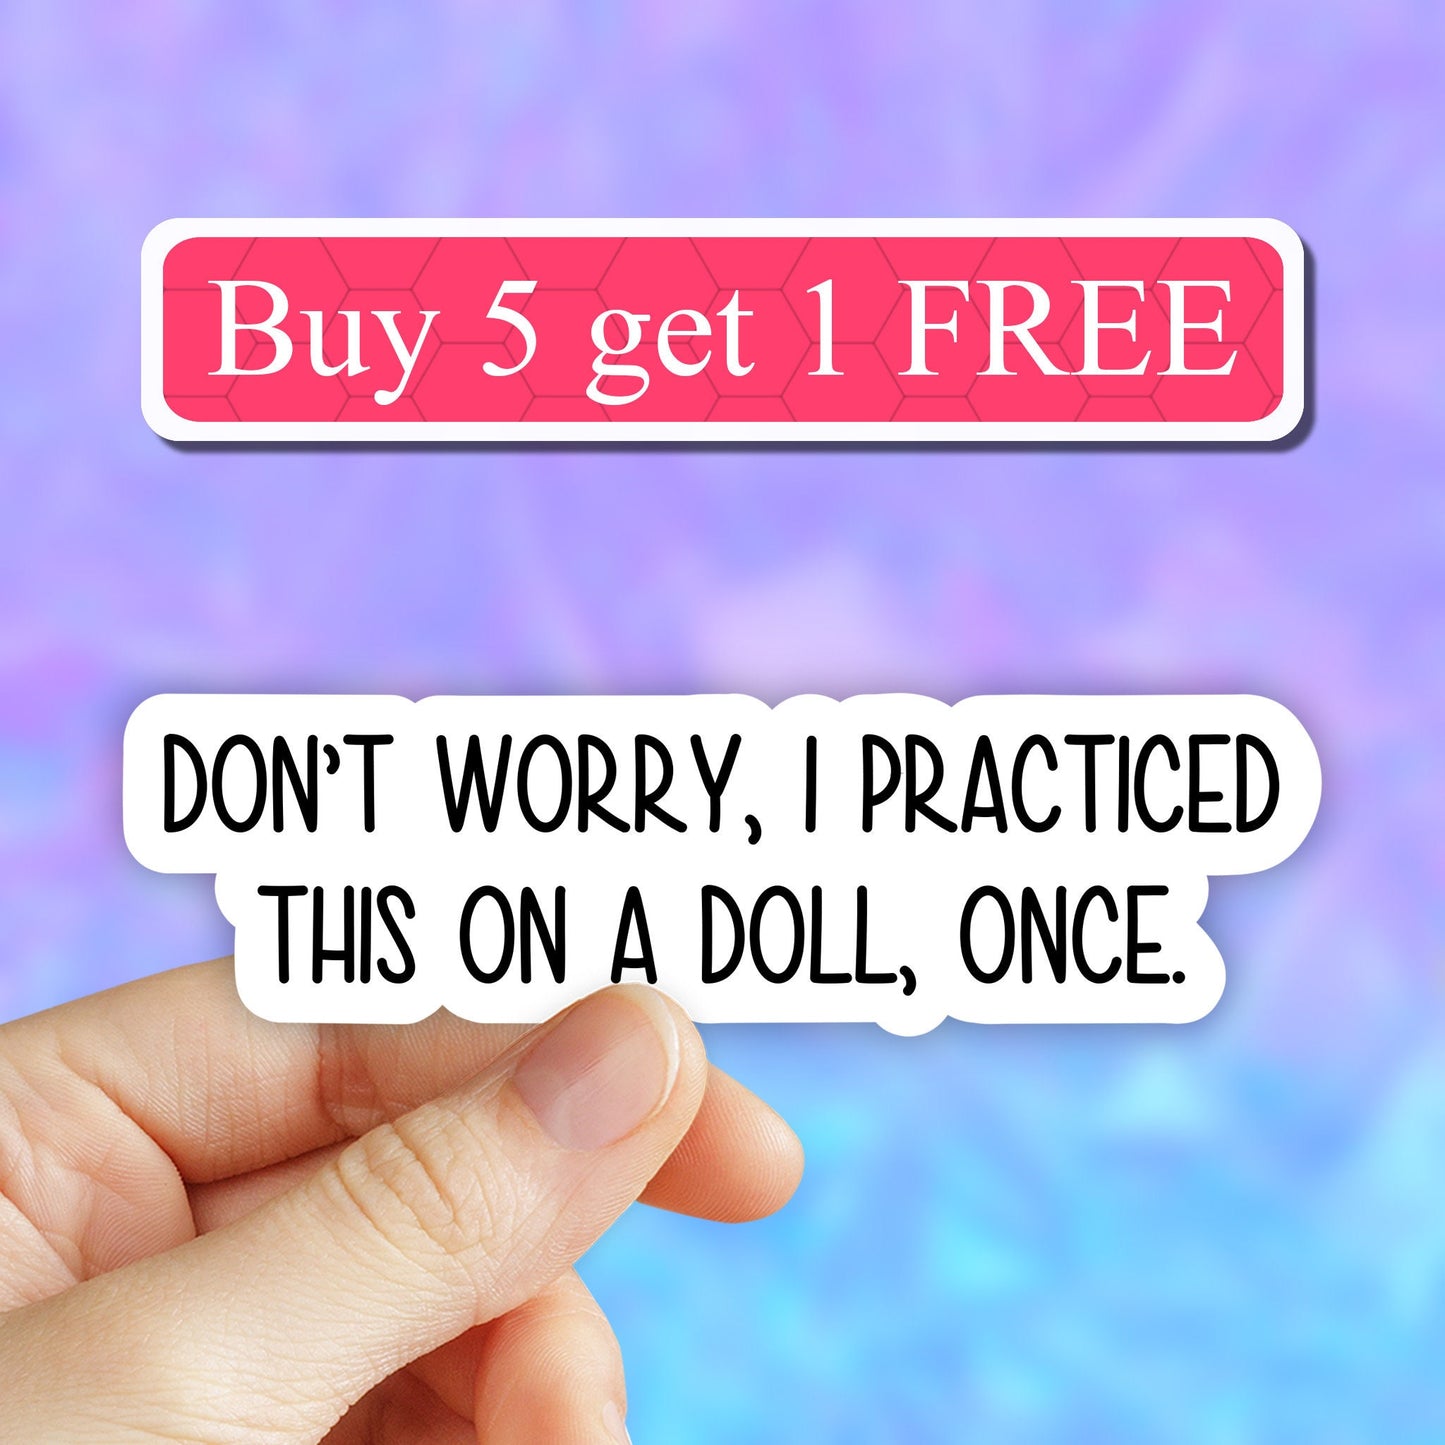 Don't worry I practiced this on a doll once sticker, Nurse Life Sticker, Nurse Stickers, Laptop Decals Popular Stickers Stickers Decals